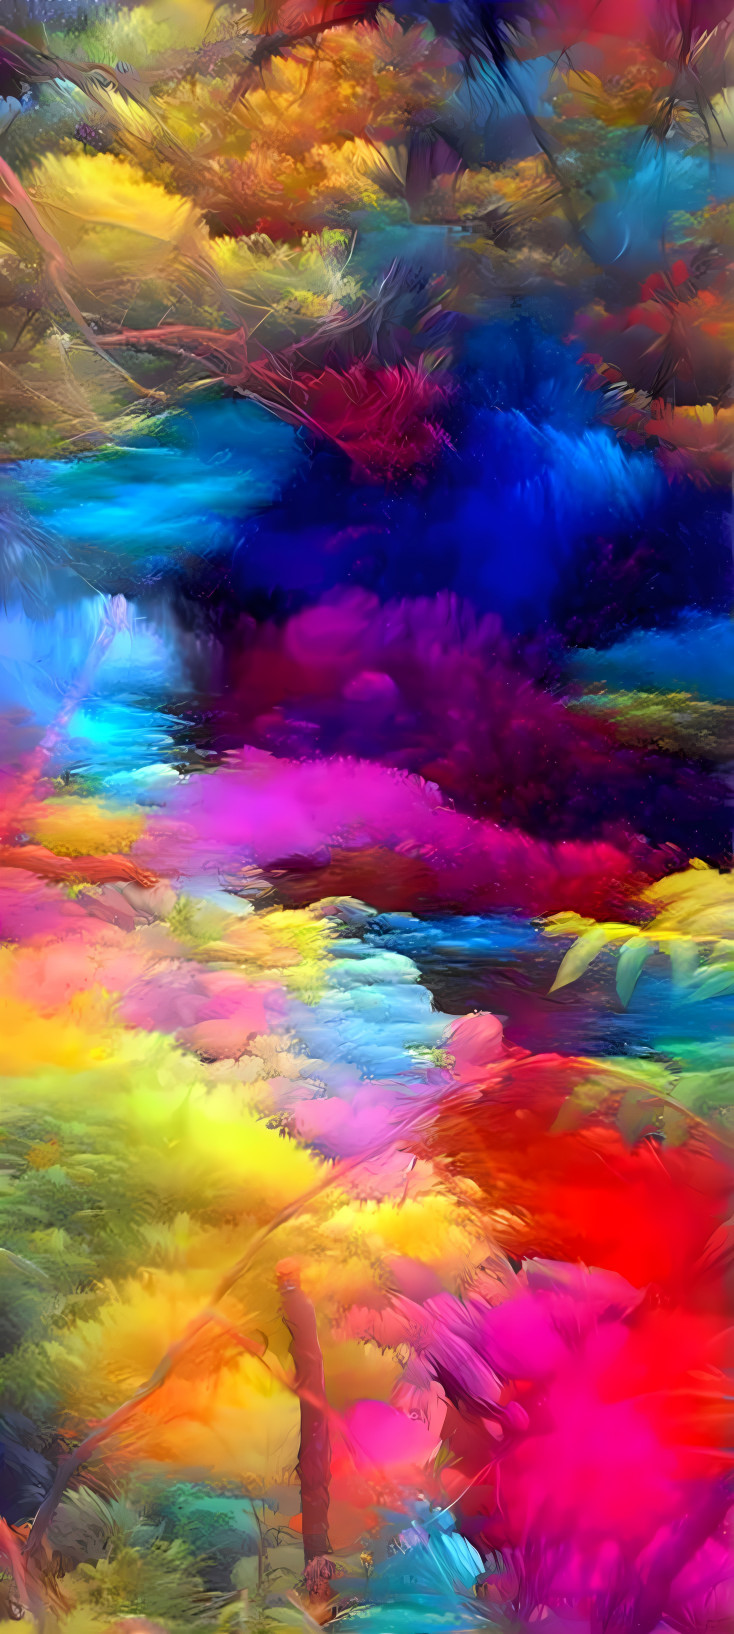 clouds of color